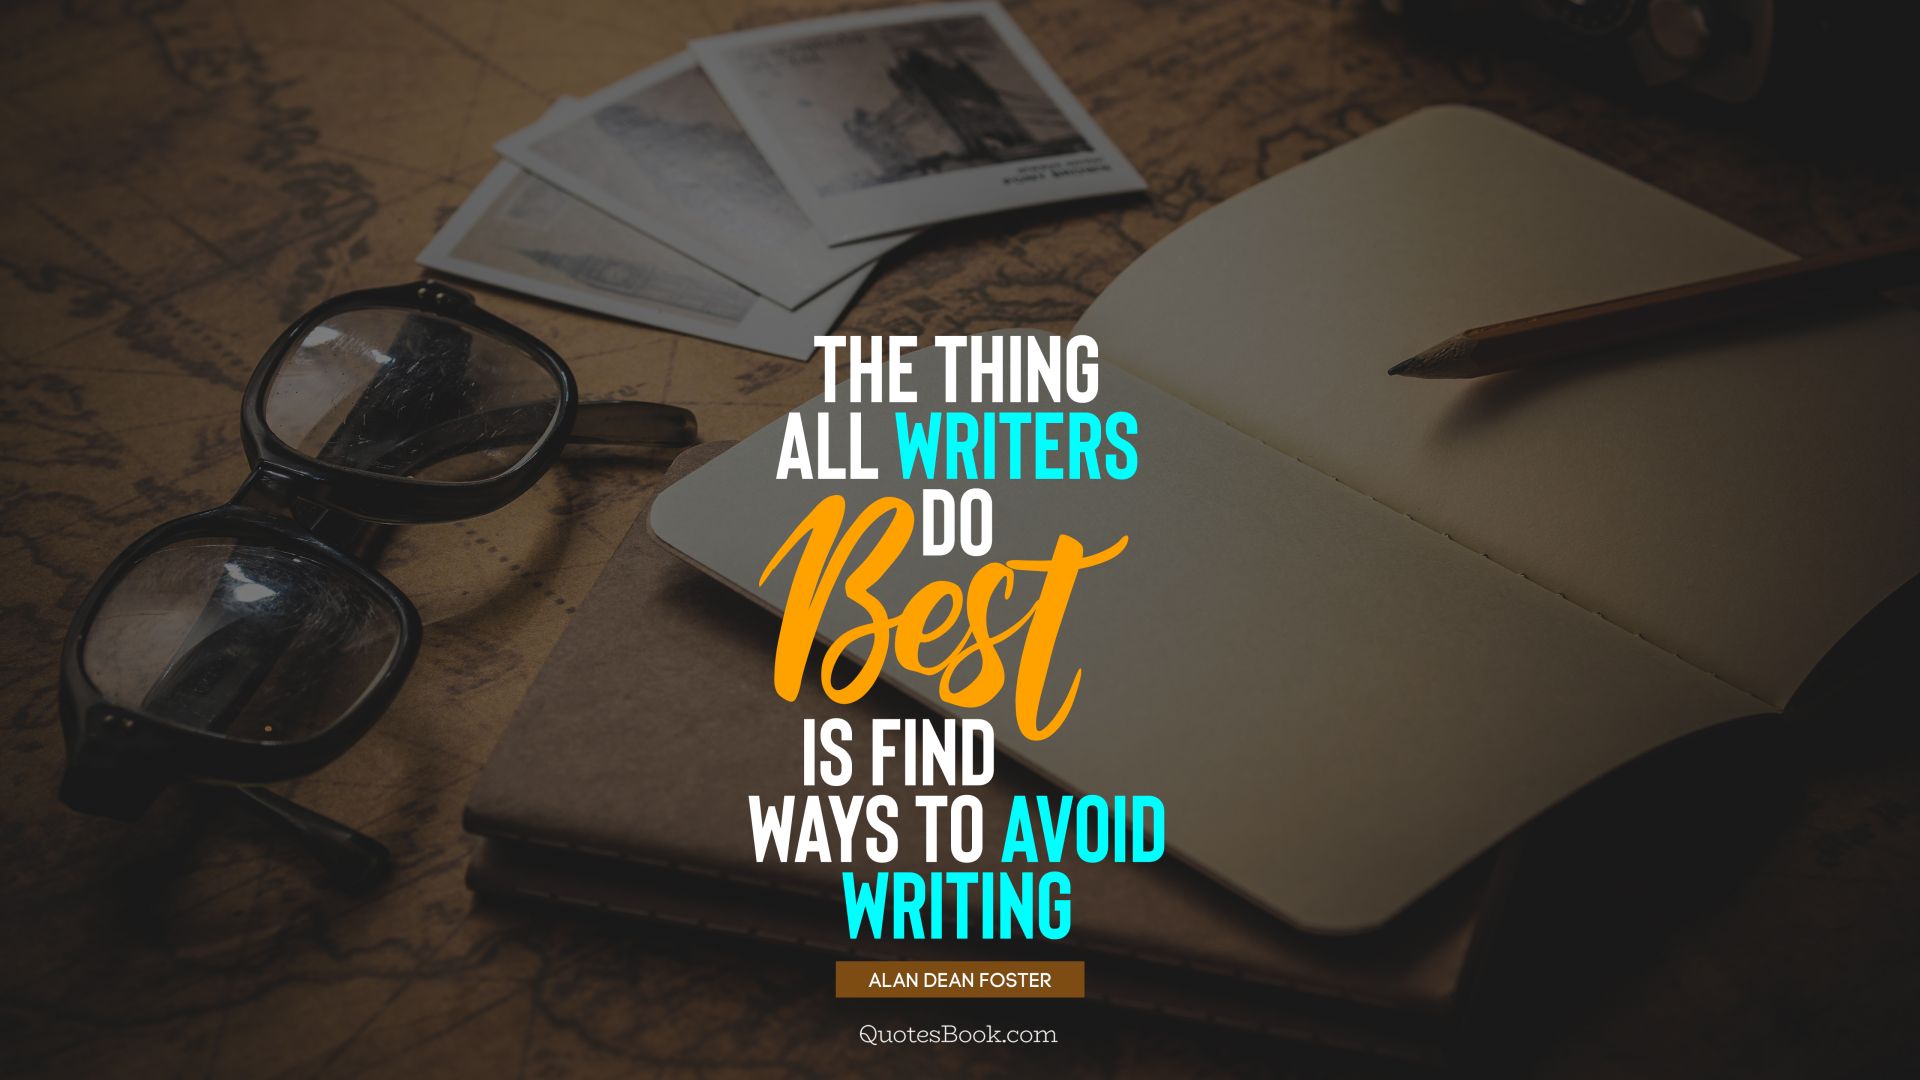 The thing all writers do best is find ways to avoid writing. - Quote by Alan Dean Foster